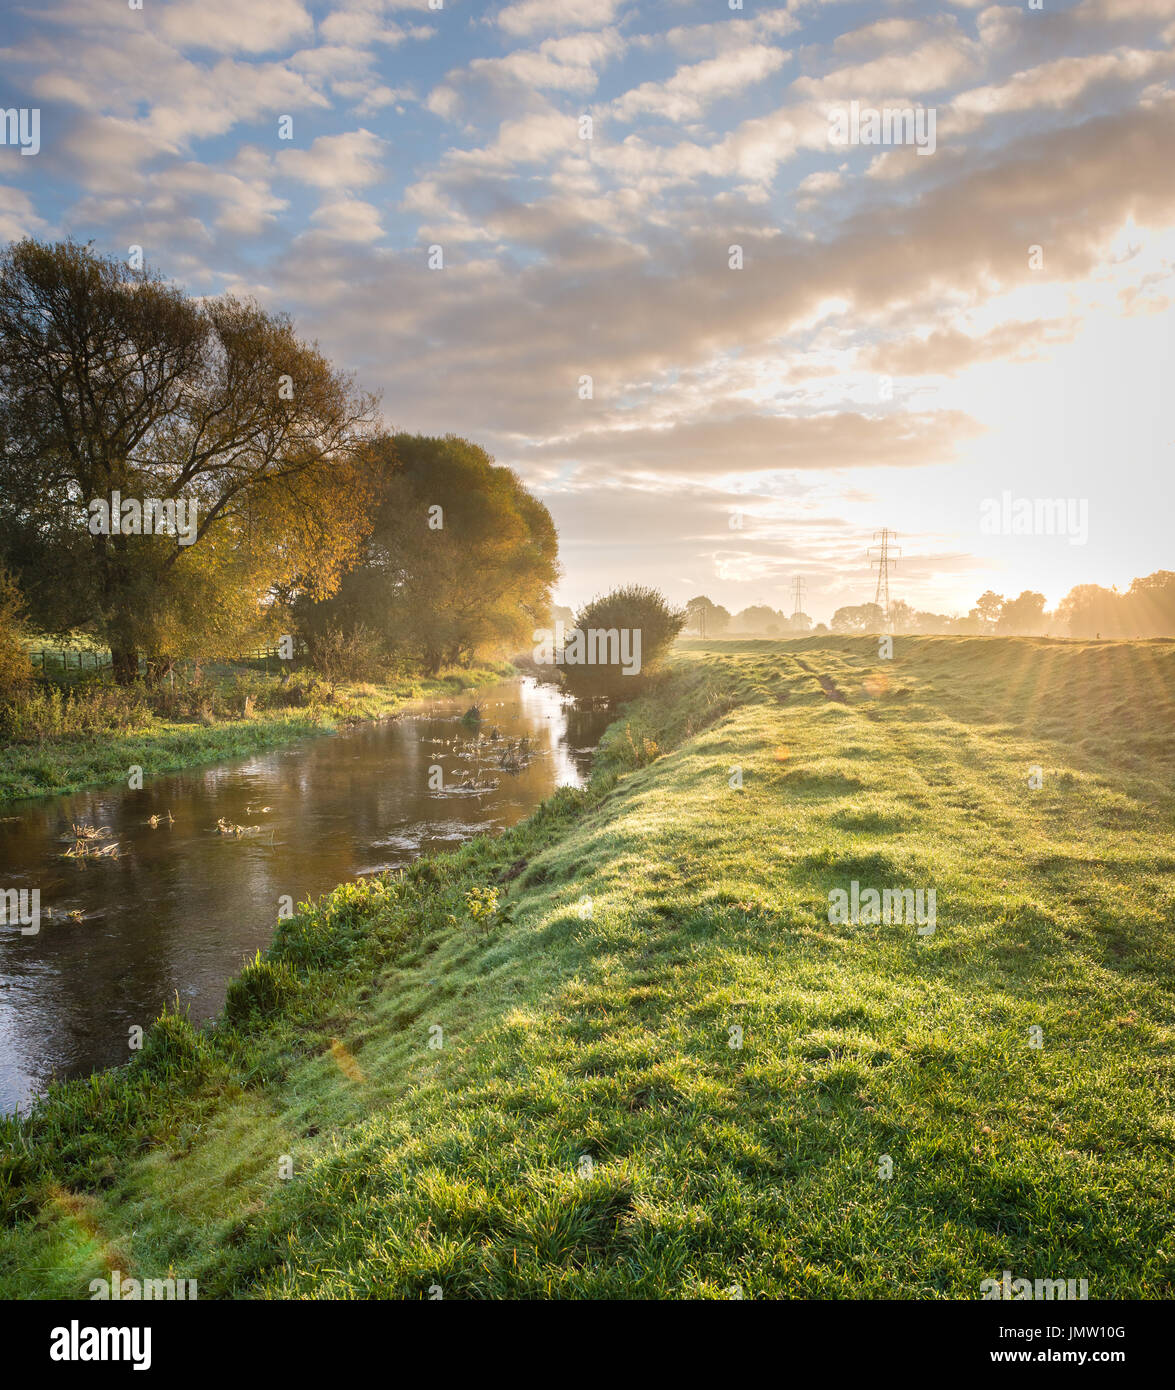 Sunrise over the River Welland near Uffington and Stamford in the rural Lincolnshire countryside, UK Stock Photo